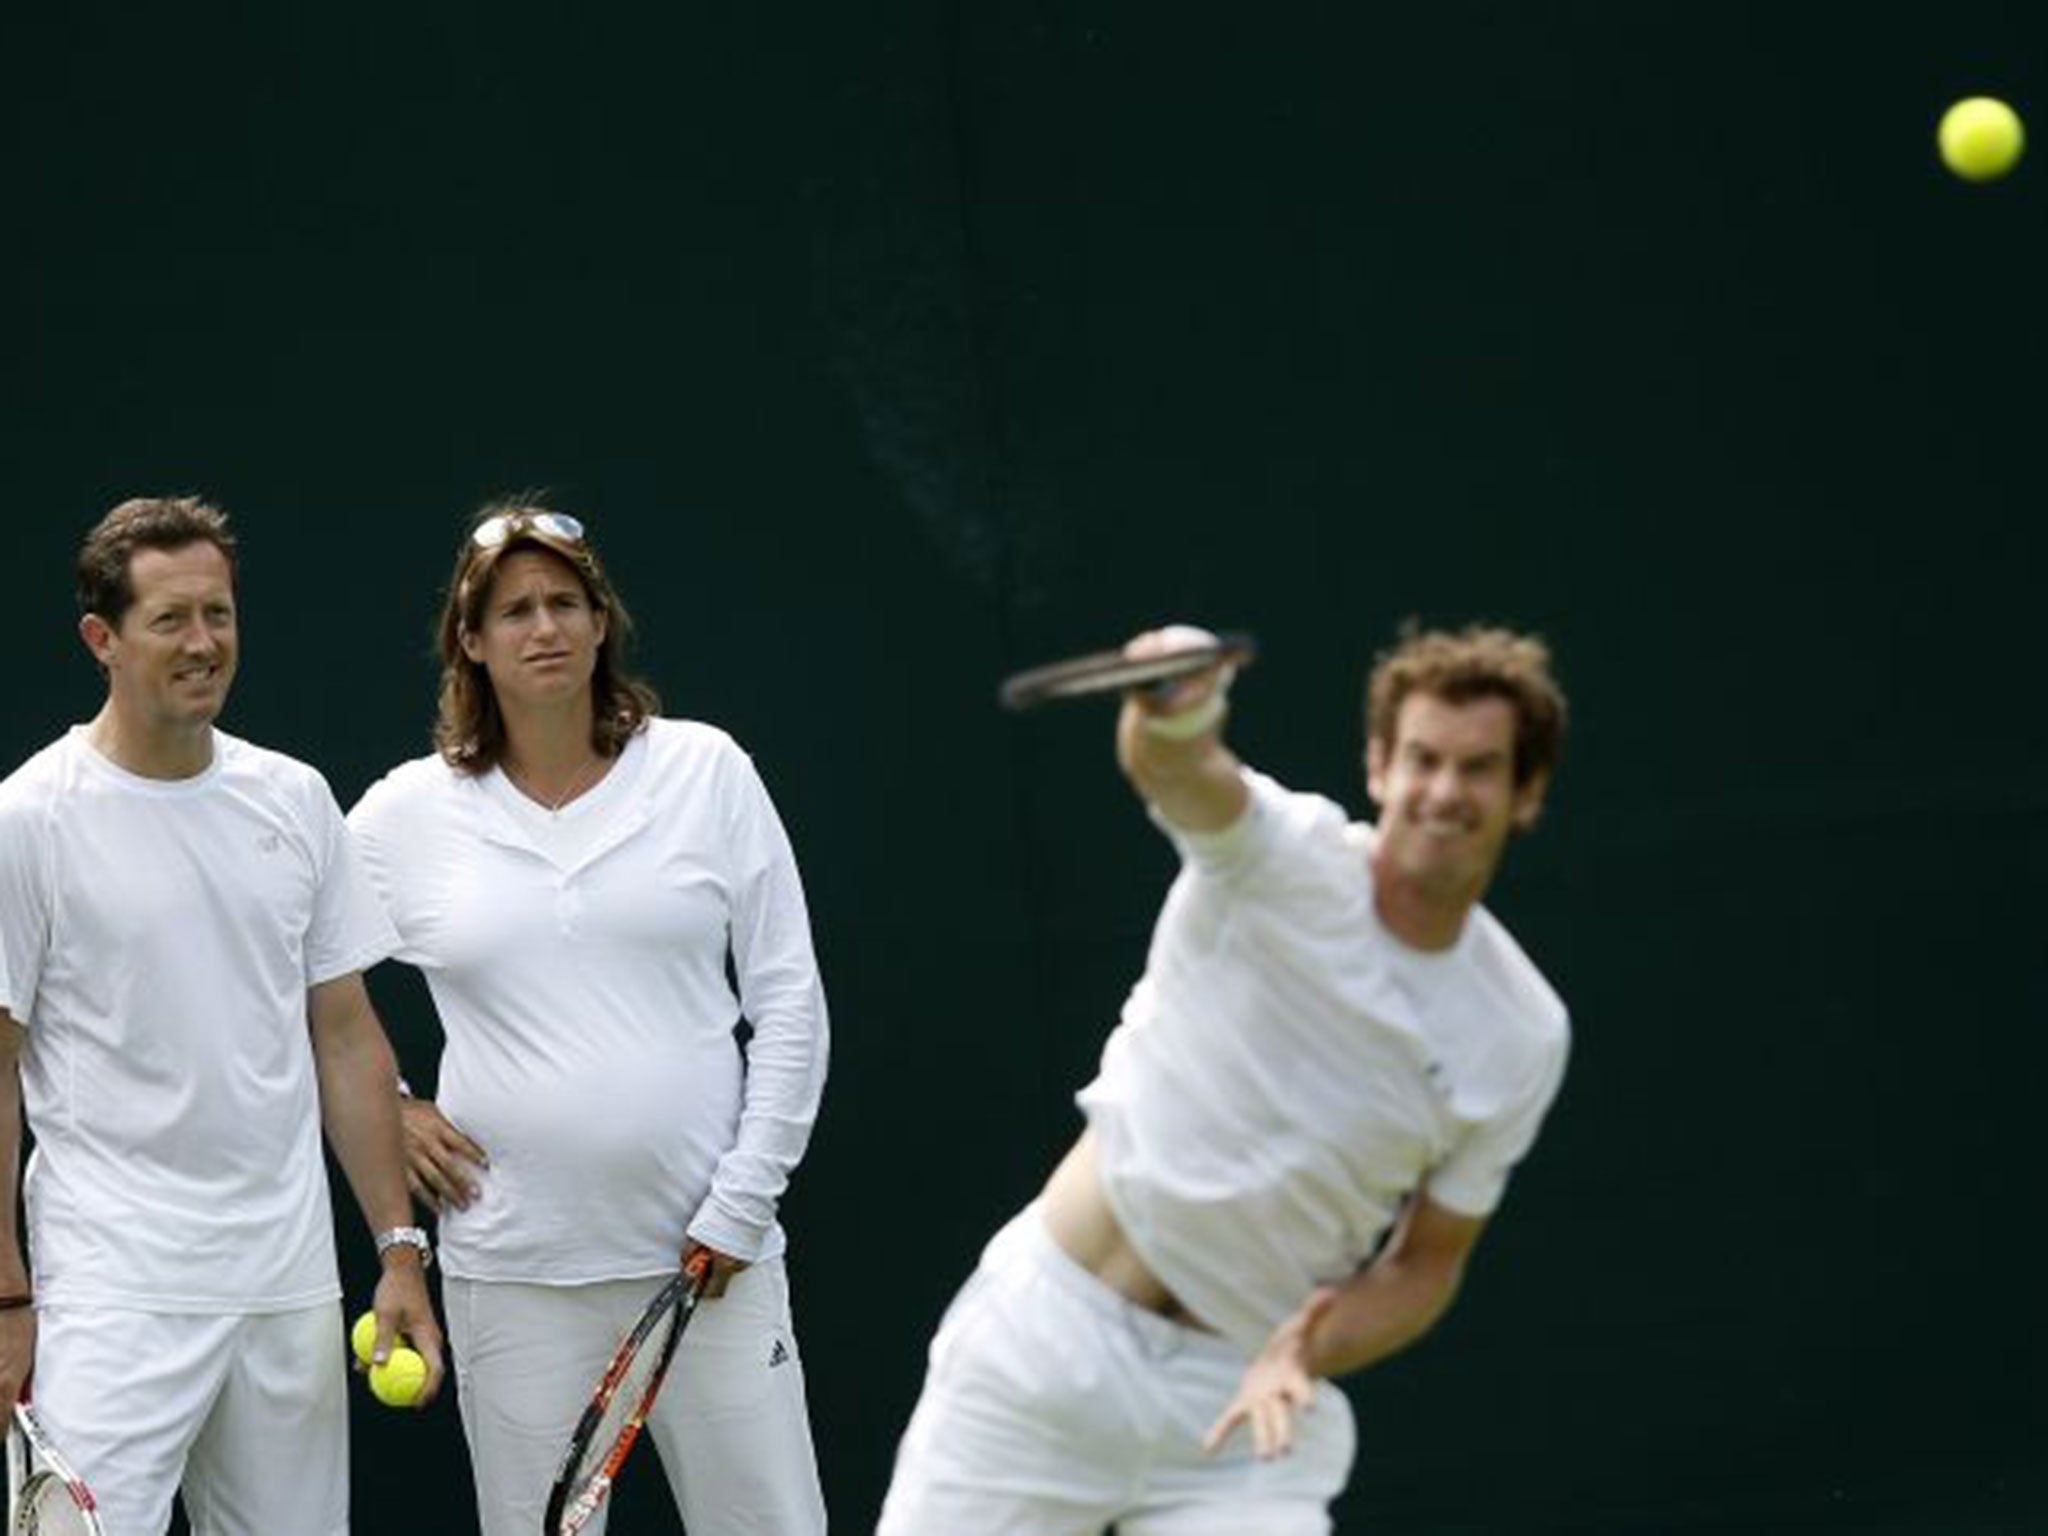 Jonas Bjorkman and Amélie Mauresmo look on as Andy Murray practises serving at Wimbledon yesterday